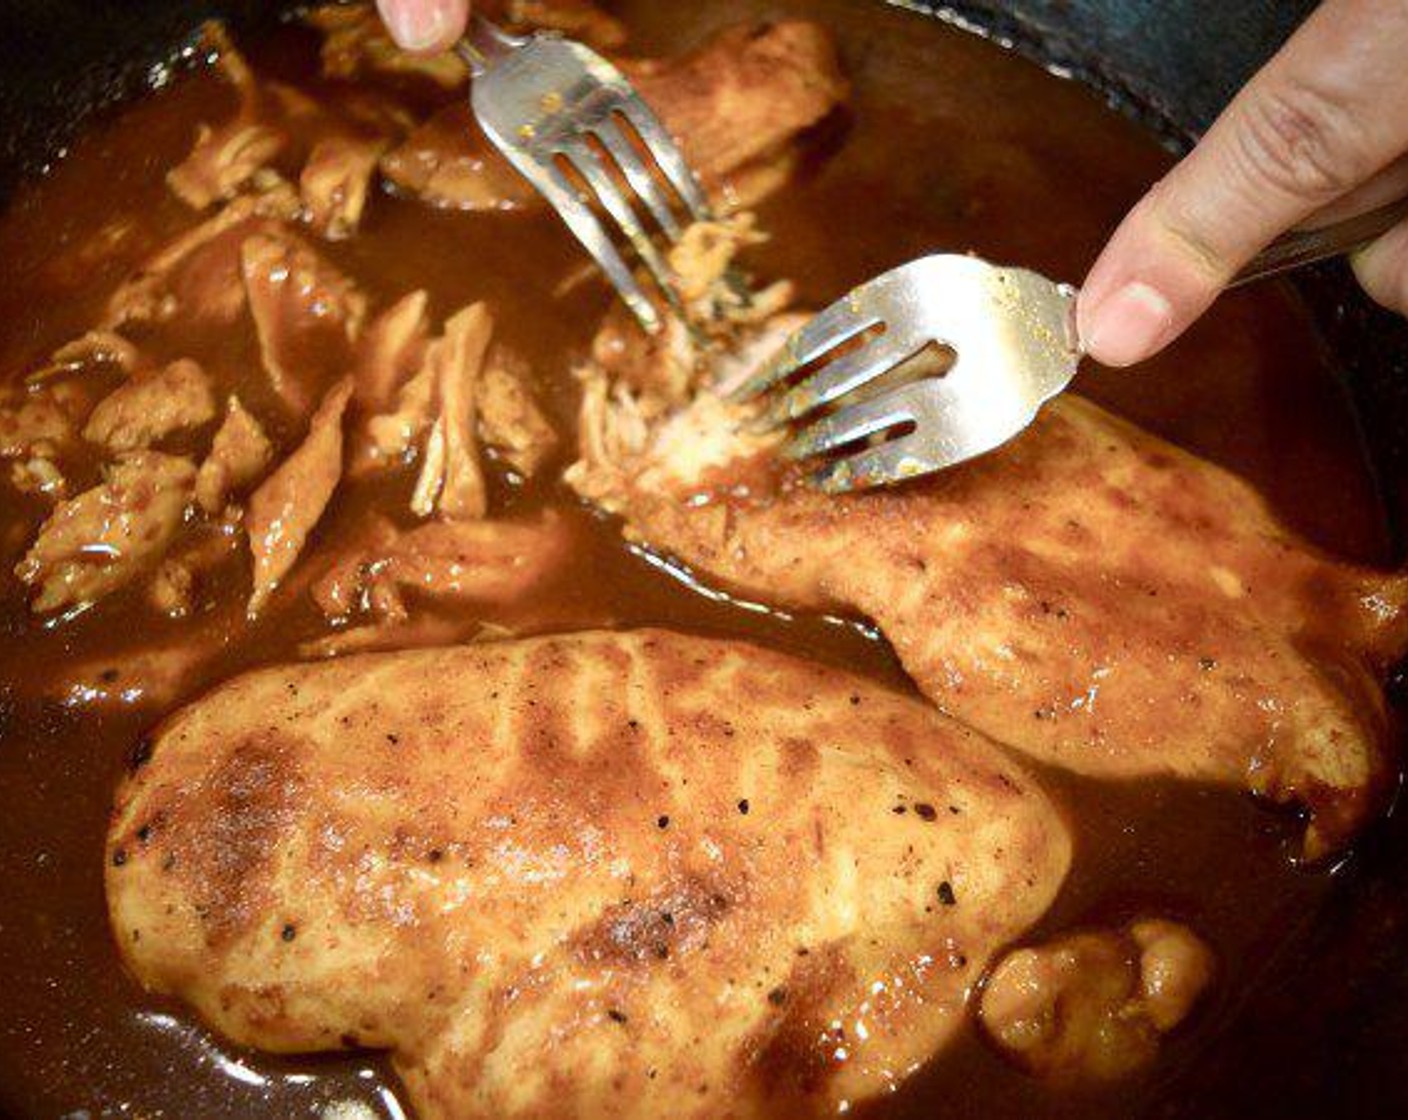 step 8 Using two forks, pull the chicken apart. Allow the chicken to sit in the the sauce and soak up some of the goodness for around 5-10 minutes. Then, its time to toast up some buns if your going the sandwich route, or just enjoy it as is.